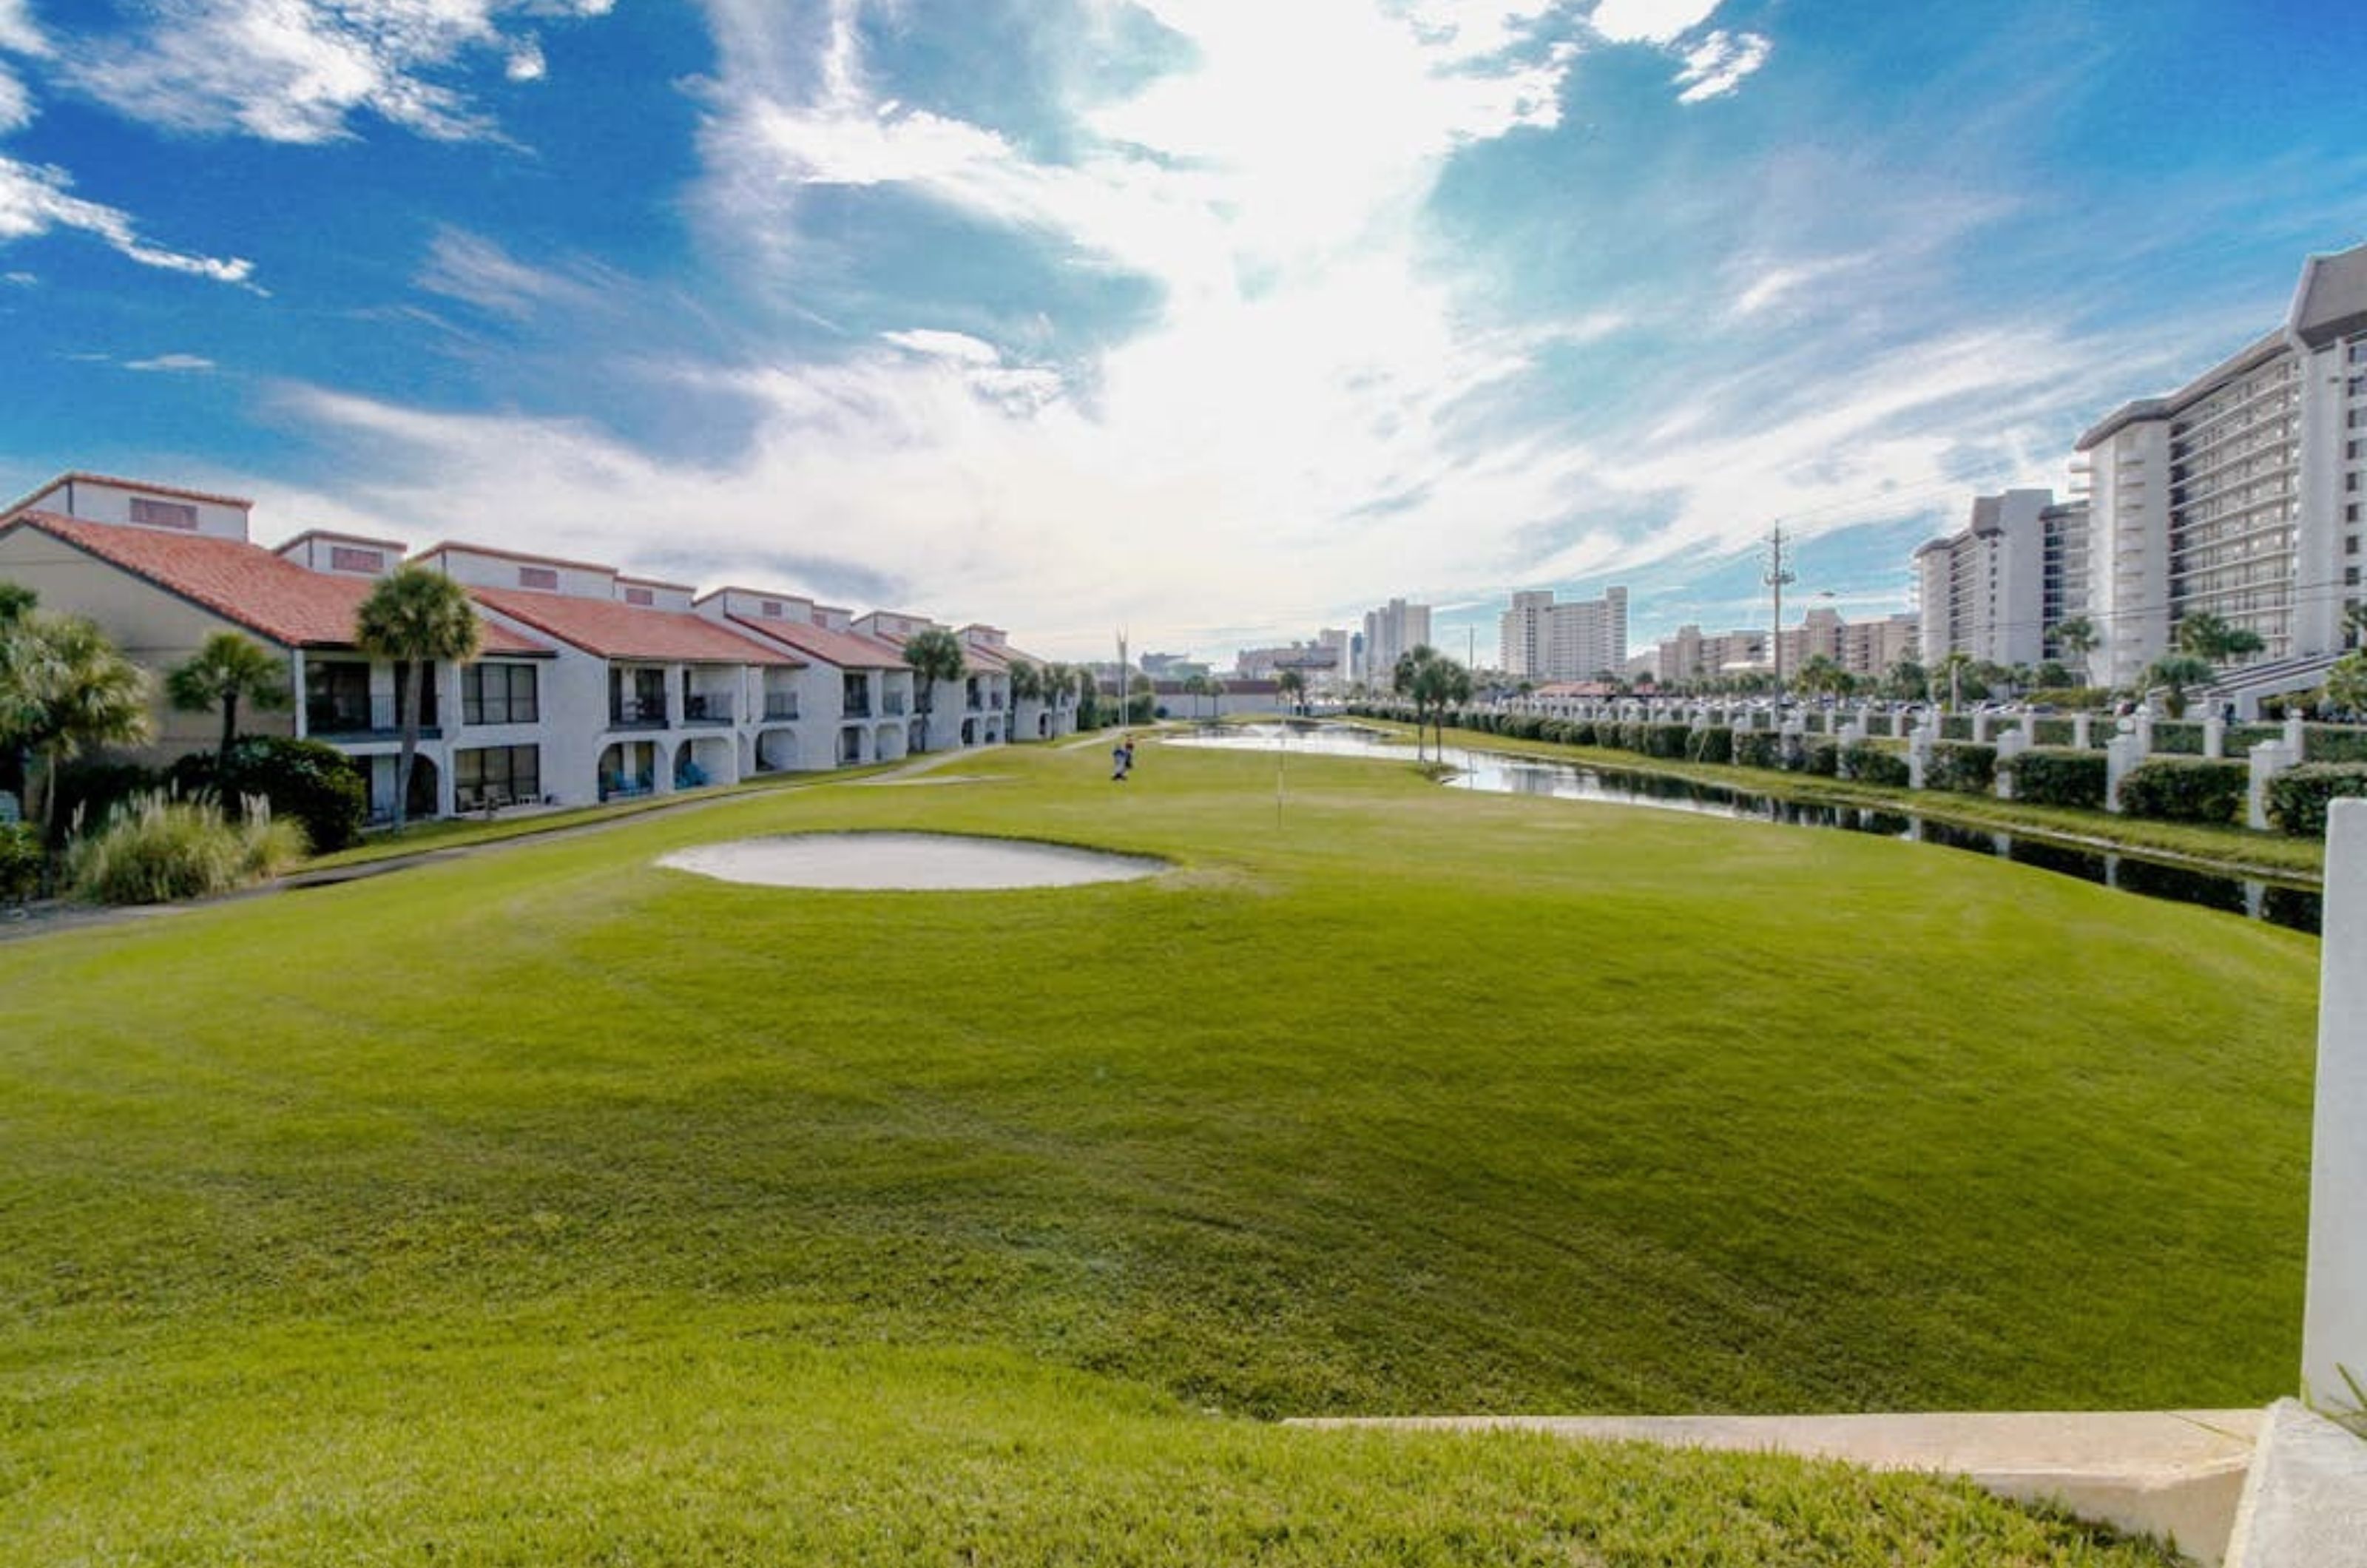 Townhomes on the edge of a golf course at Edgewater Beach and Golf Resort 